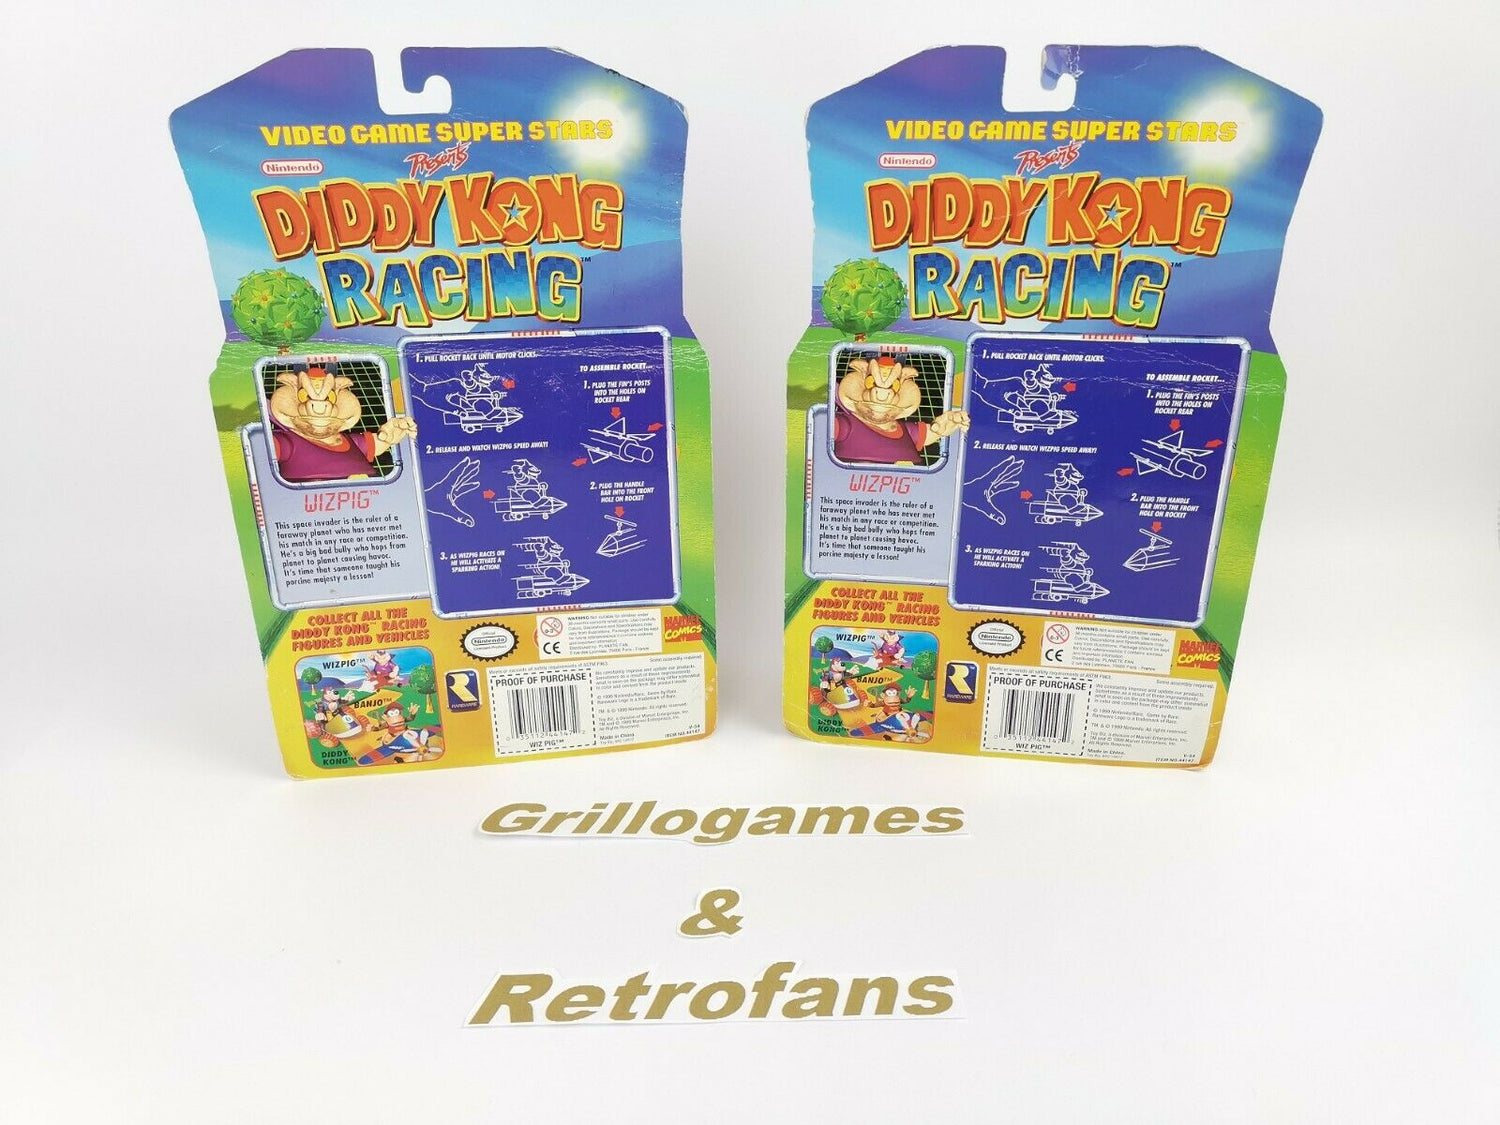 Video game Super stars presents Diddy Kong Racing 